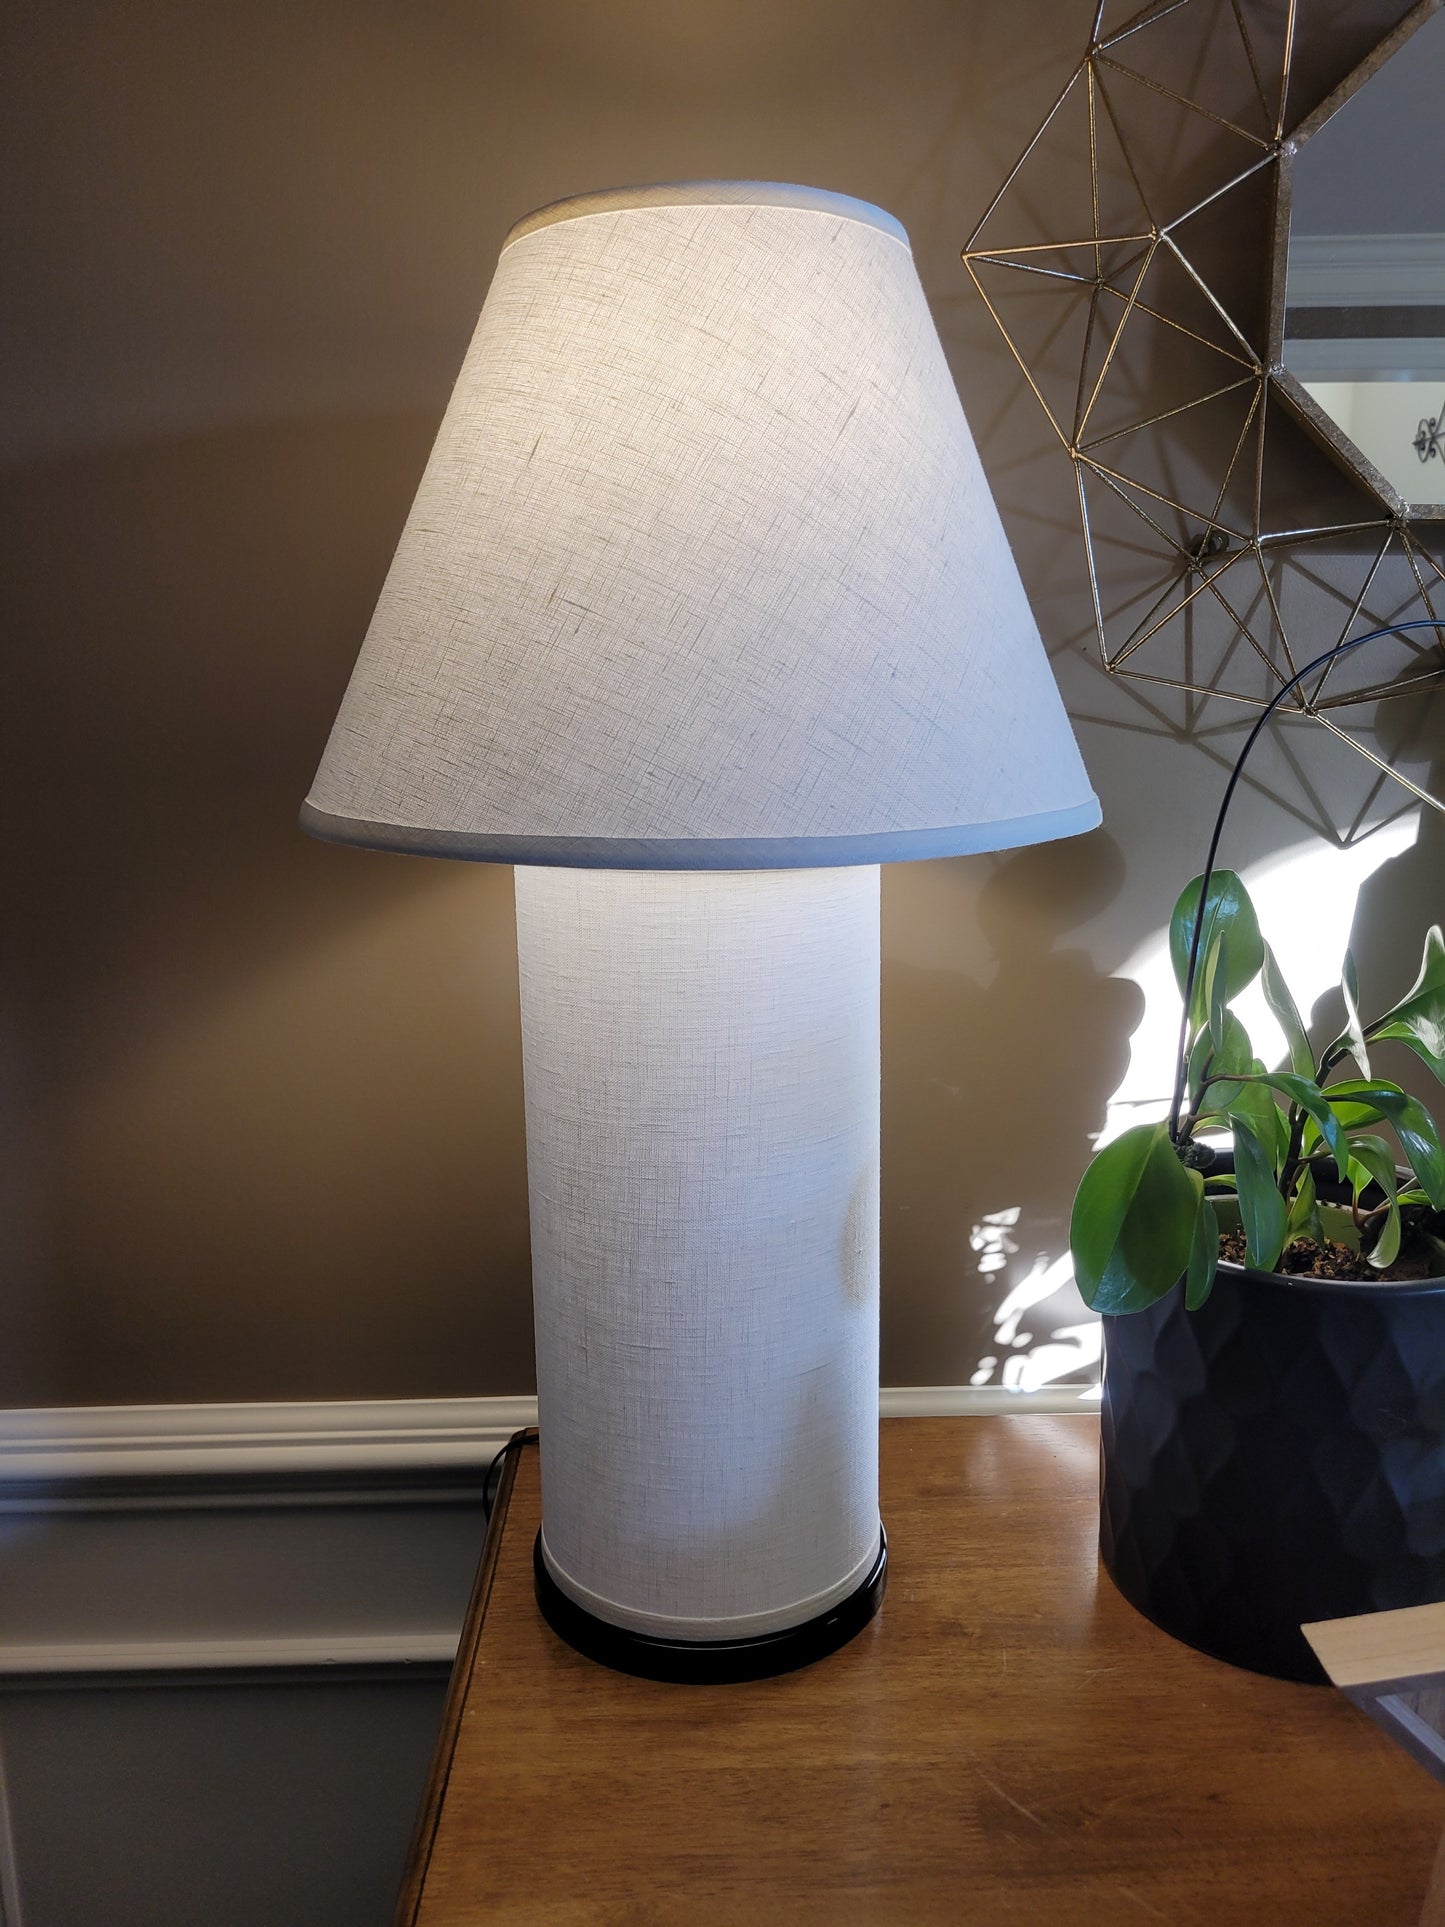 POP Table Lamp with White Linen Coolie Lamp Shade